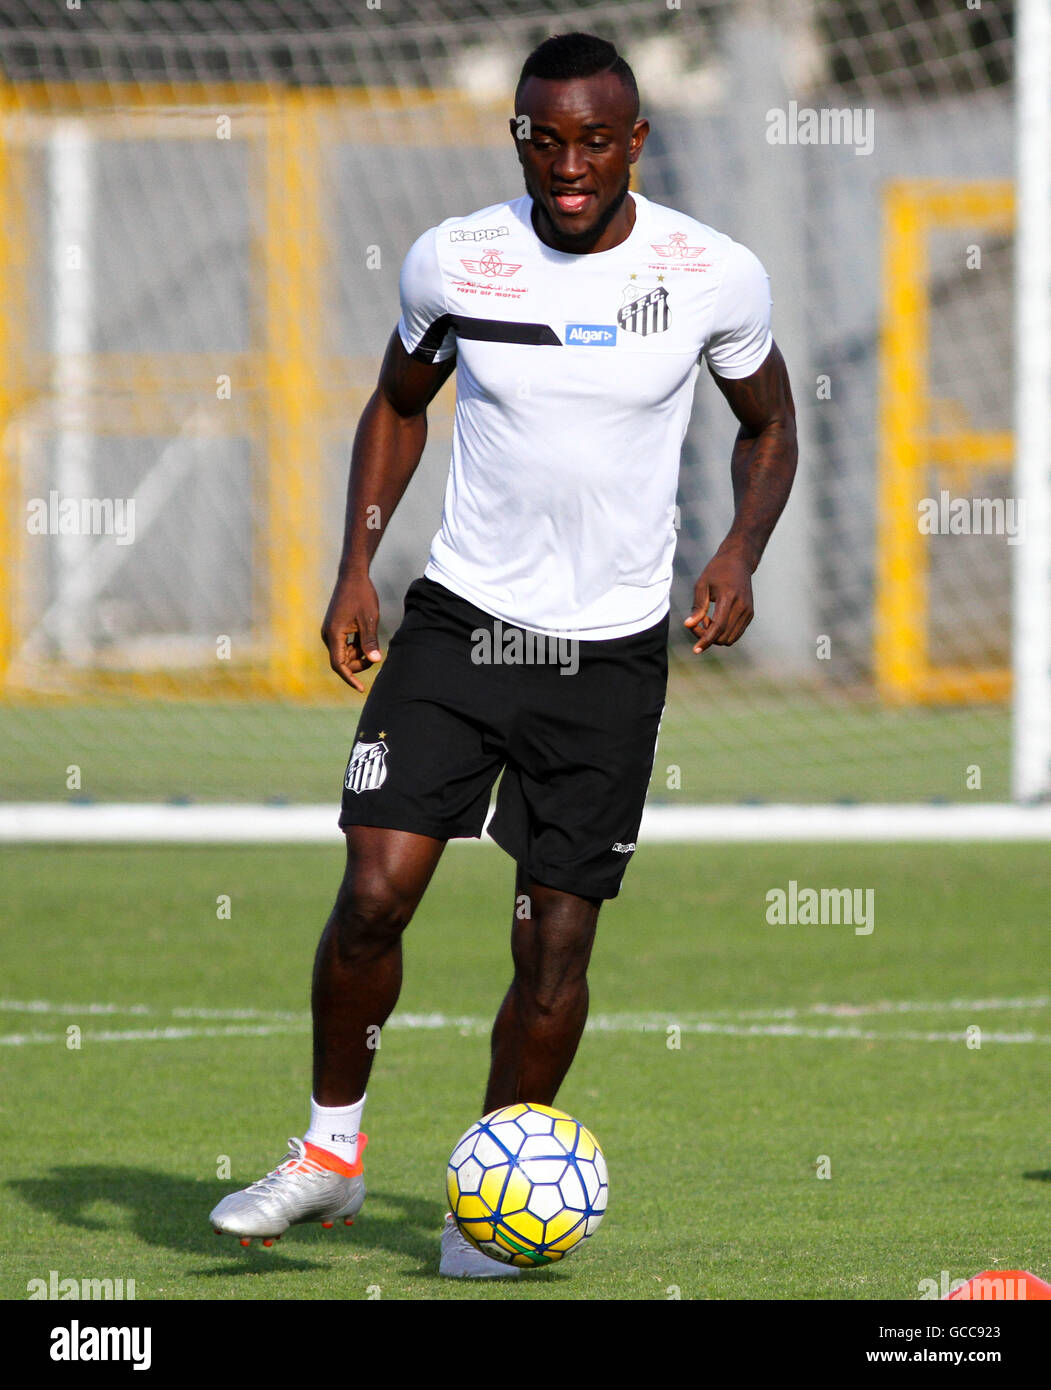 Joel during training Santos FC held on Friday (08) in the CT Rei Pel? in the city of Santos. Team prepares for the next confrontation of Tuesday (12), against Palmeiras at Allianz Park in S?o Paulo, in a game for the Brazilian Championship in 2016. Stock Photo